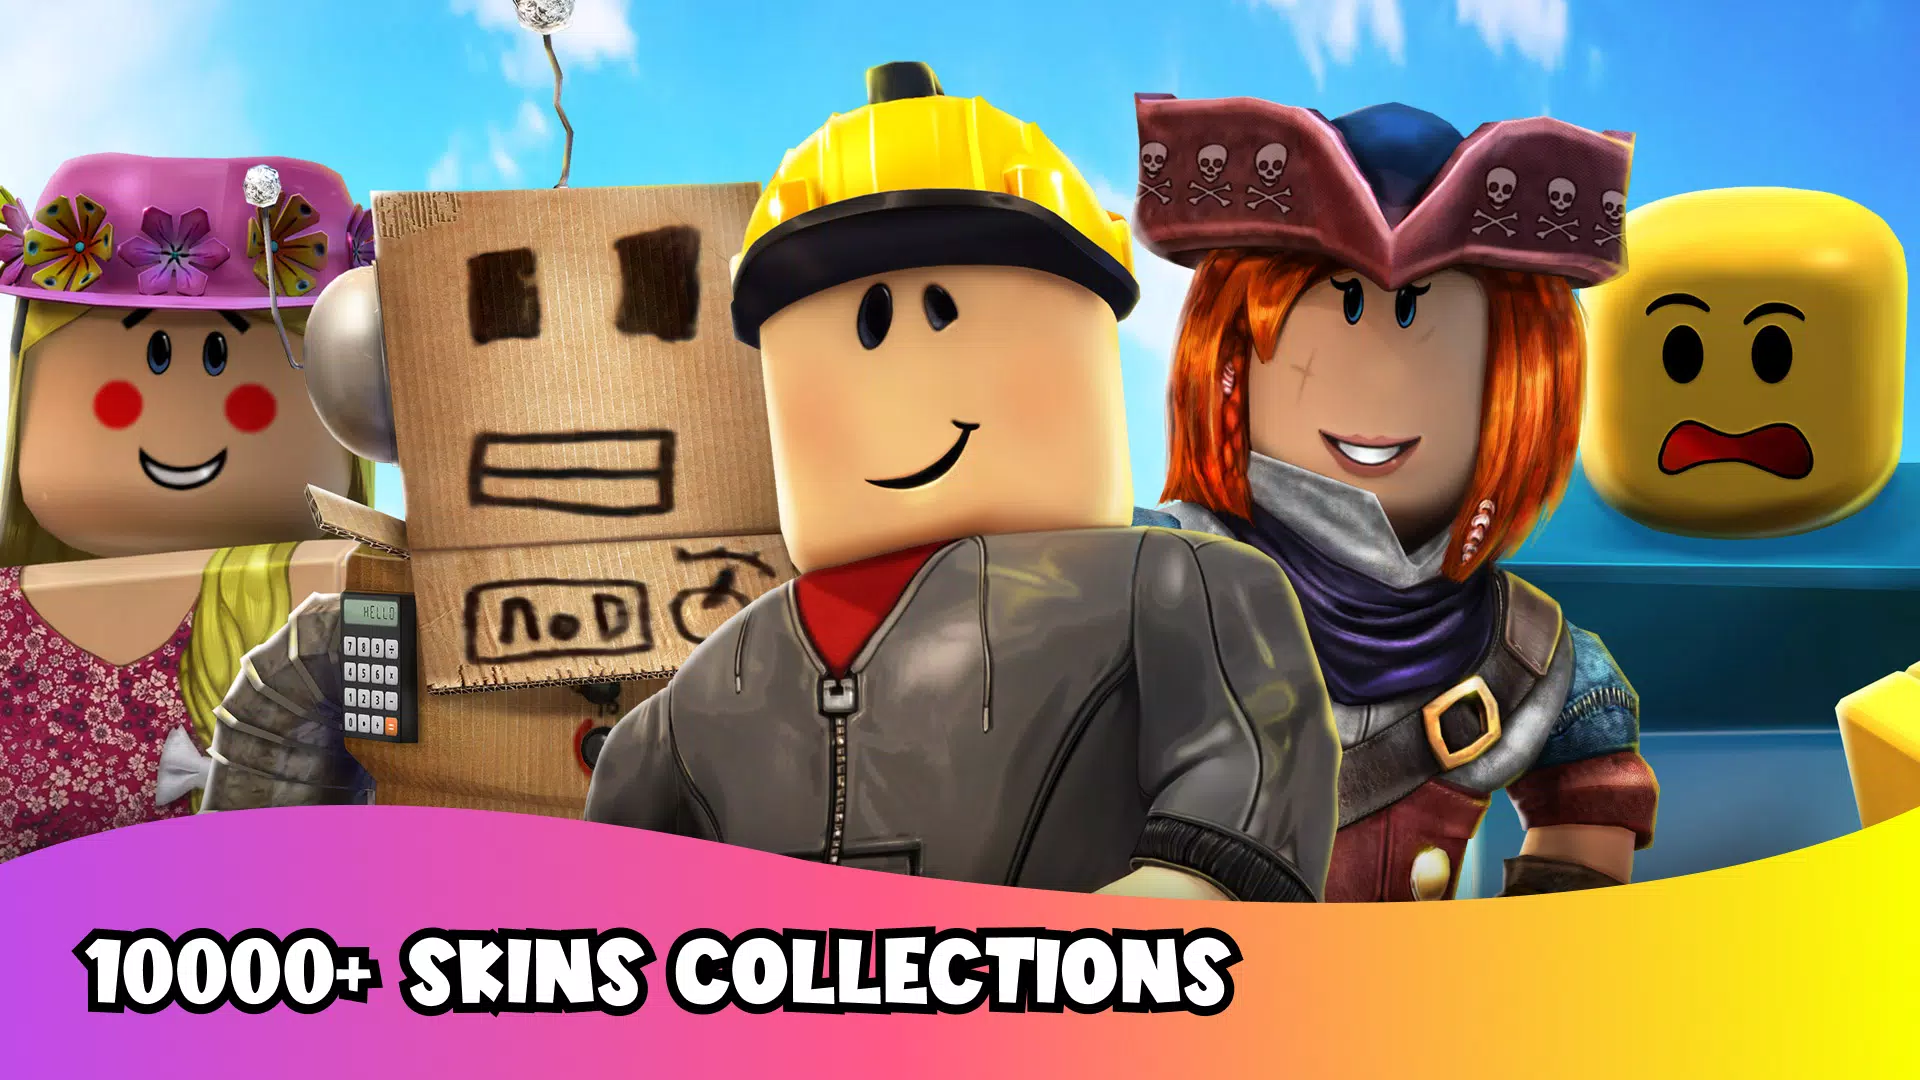 Girls Skins for Roblox APK (Android App) - Free Download